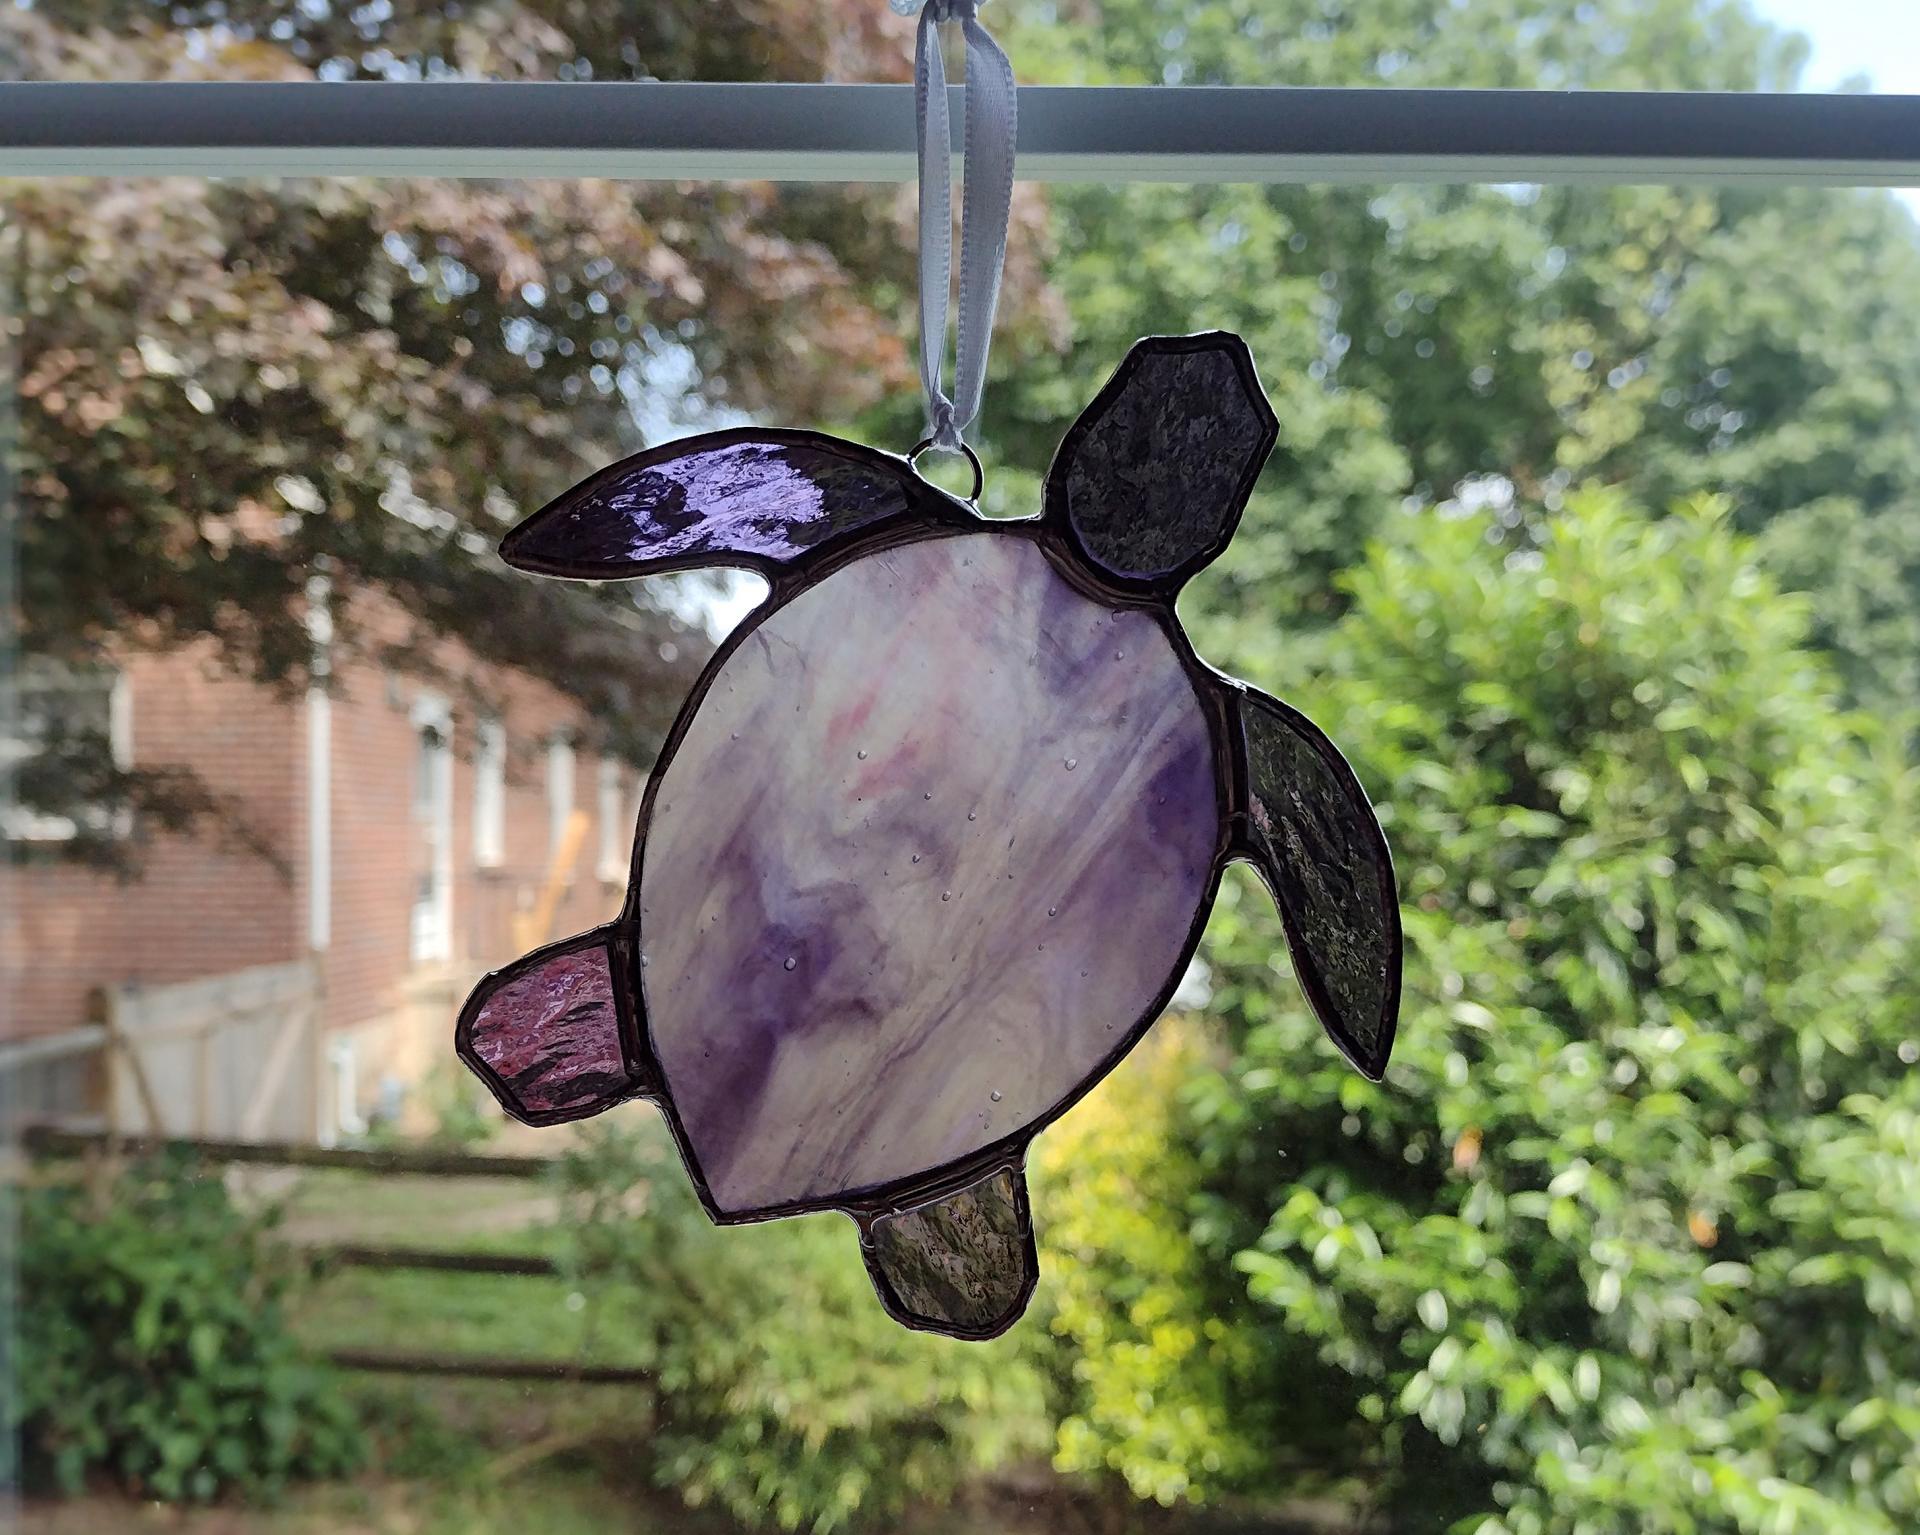 Stained Glass Sea Turtle Suncatcher, Purple Youghiogheny